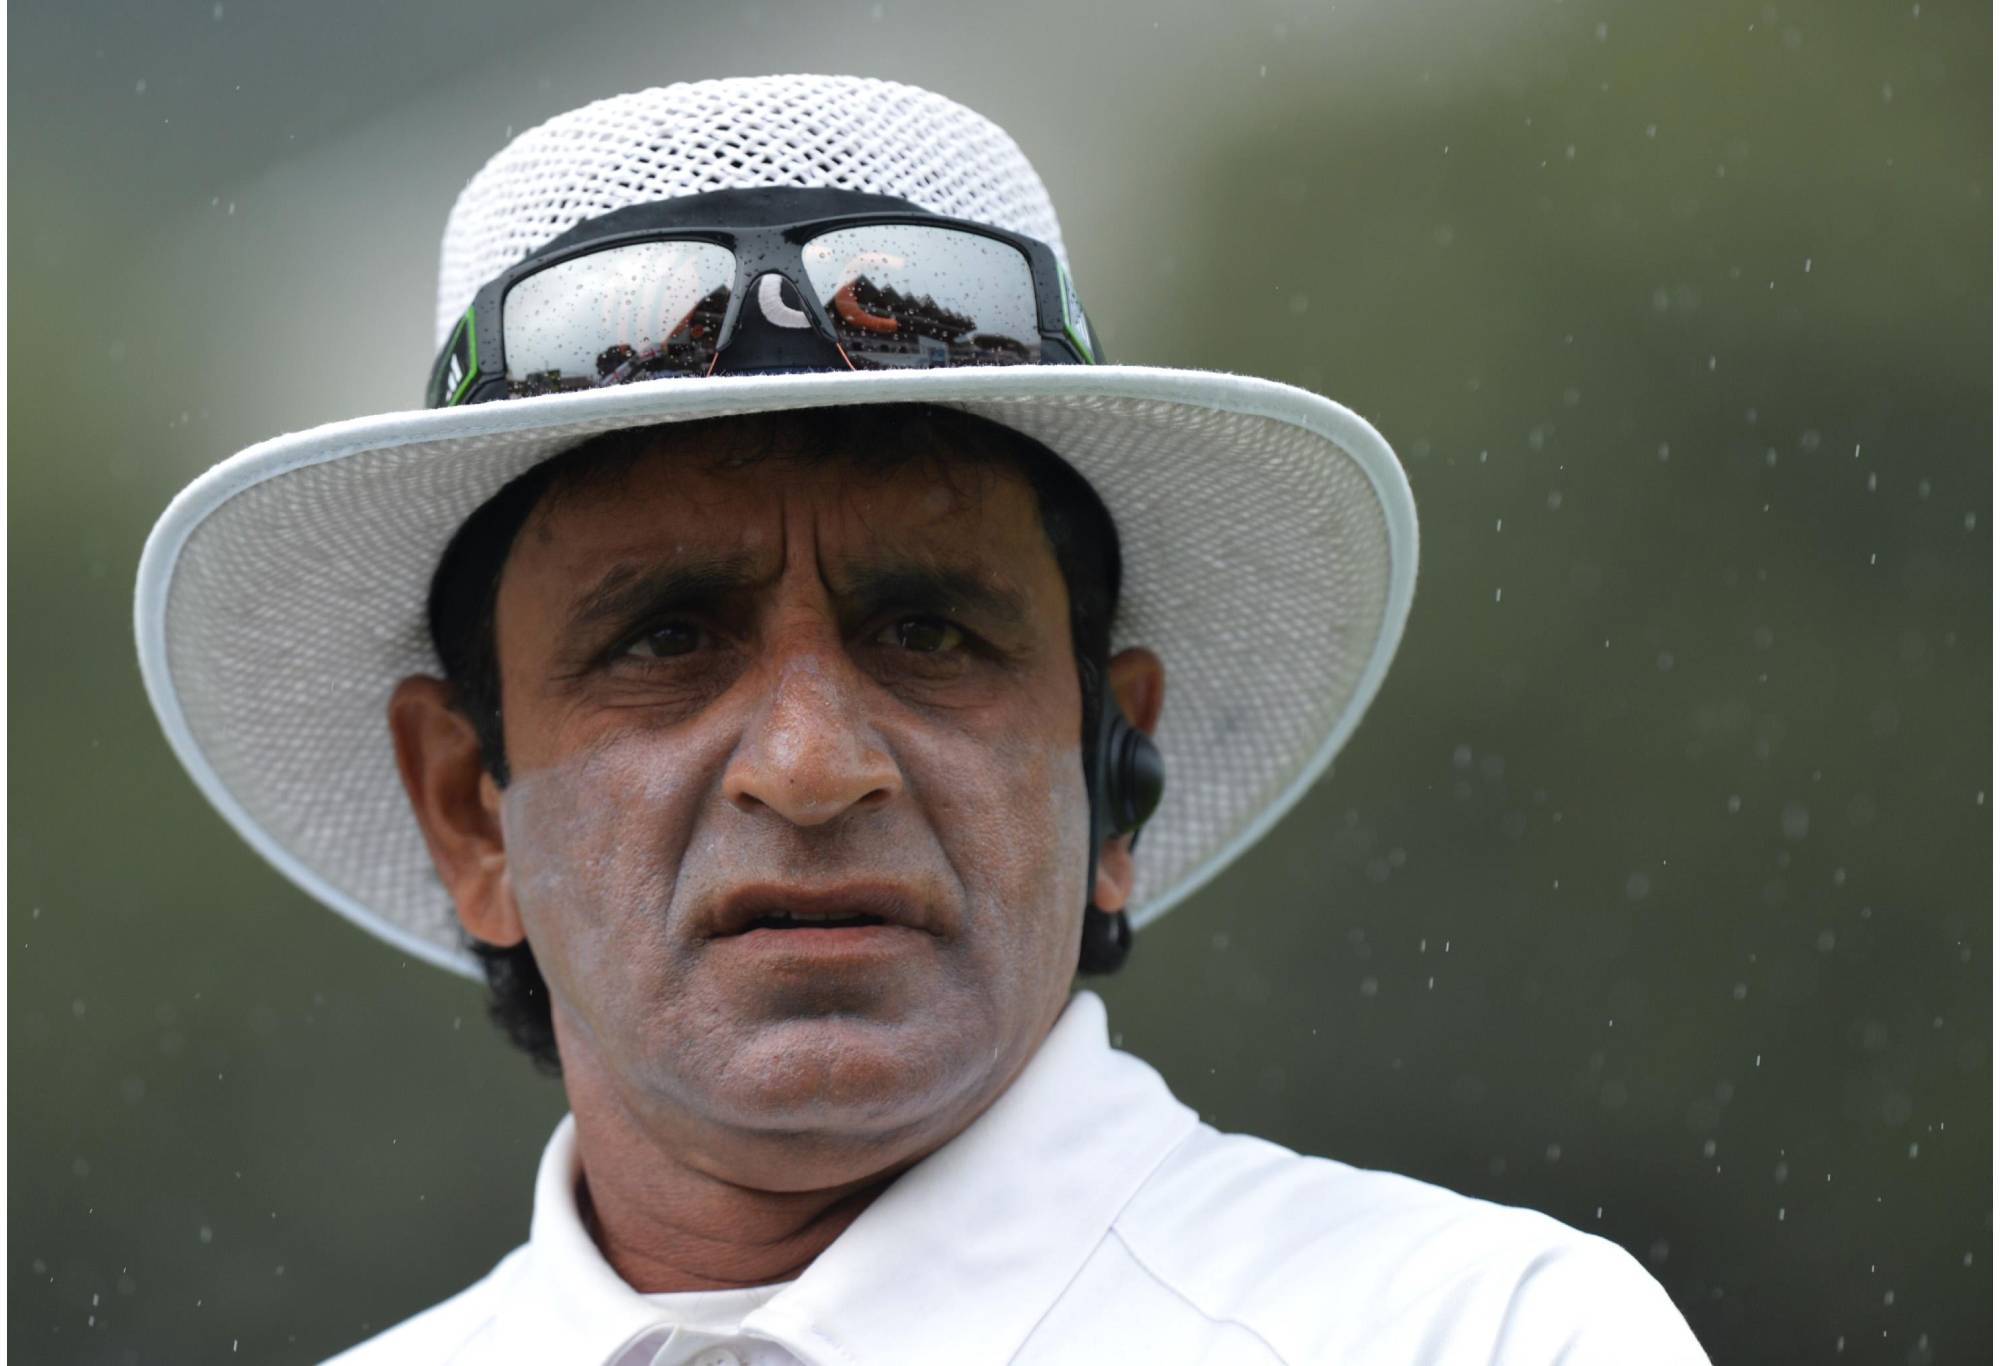 Umpire Asad Rauf looks-on as rain falls during day four of the Second Test match at Hawkins Basin Reserve, Wellington, New Zealand.   (Photo by Anthony Devlin/PA Images via Getty Images)